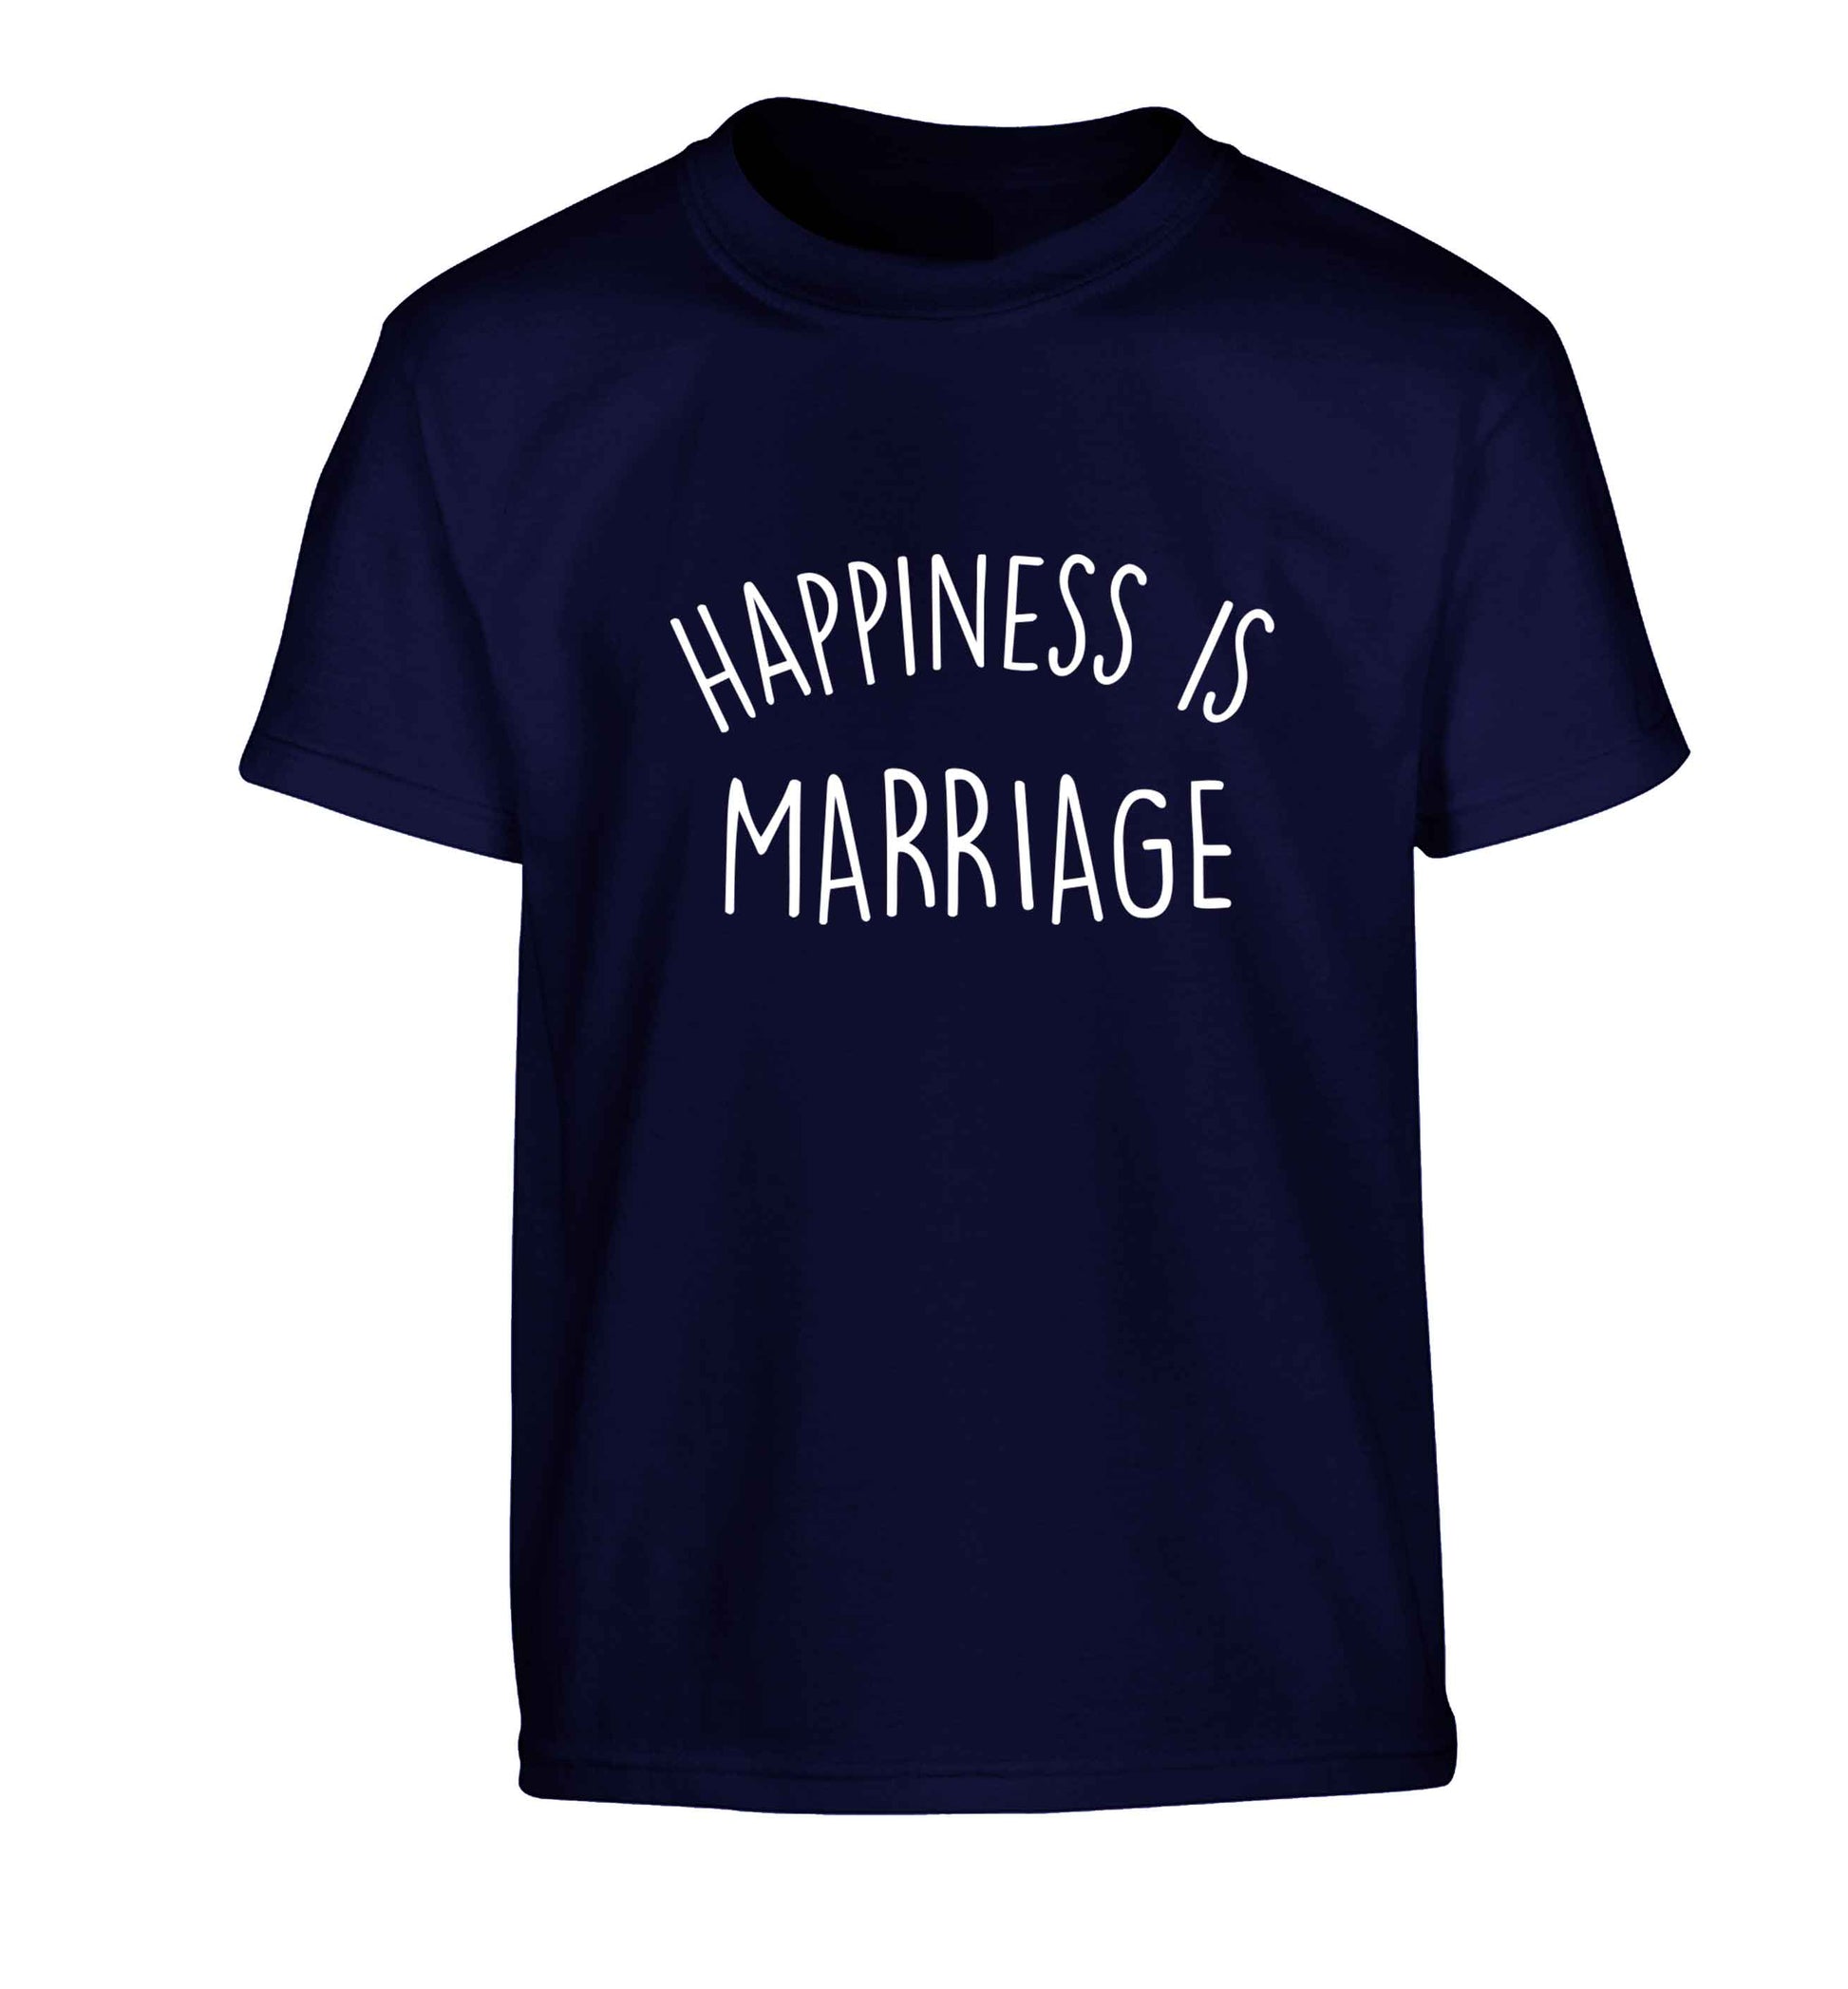 Happiness is marriage Children's navy Tshirt 12-13 Years